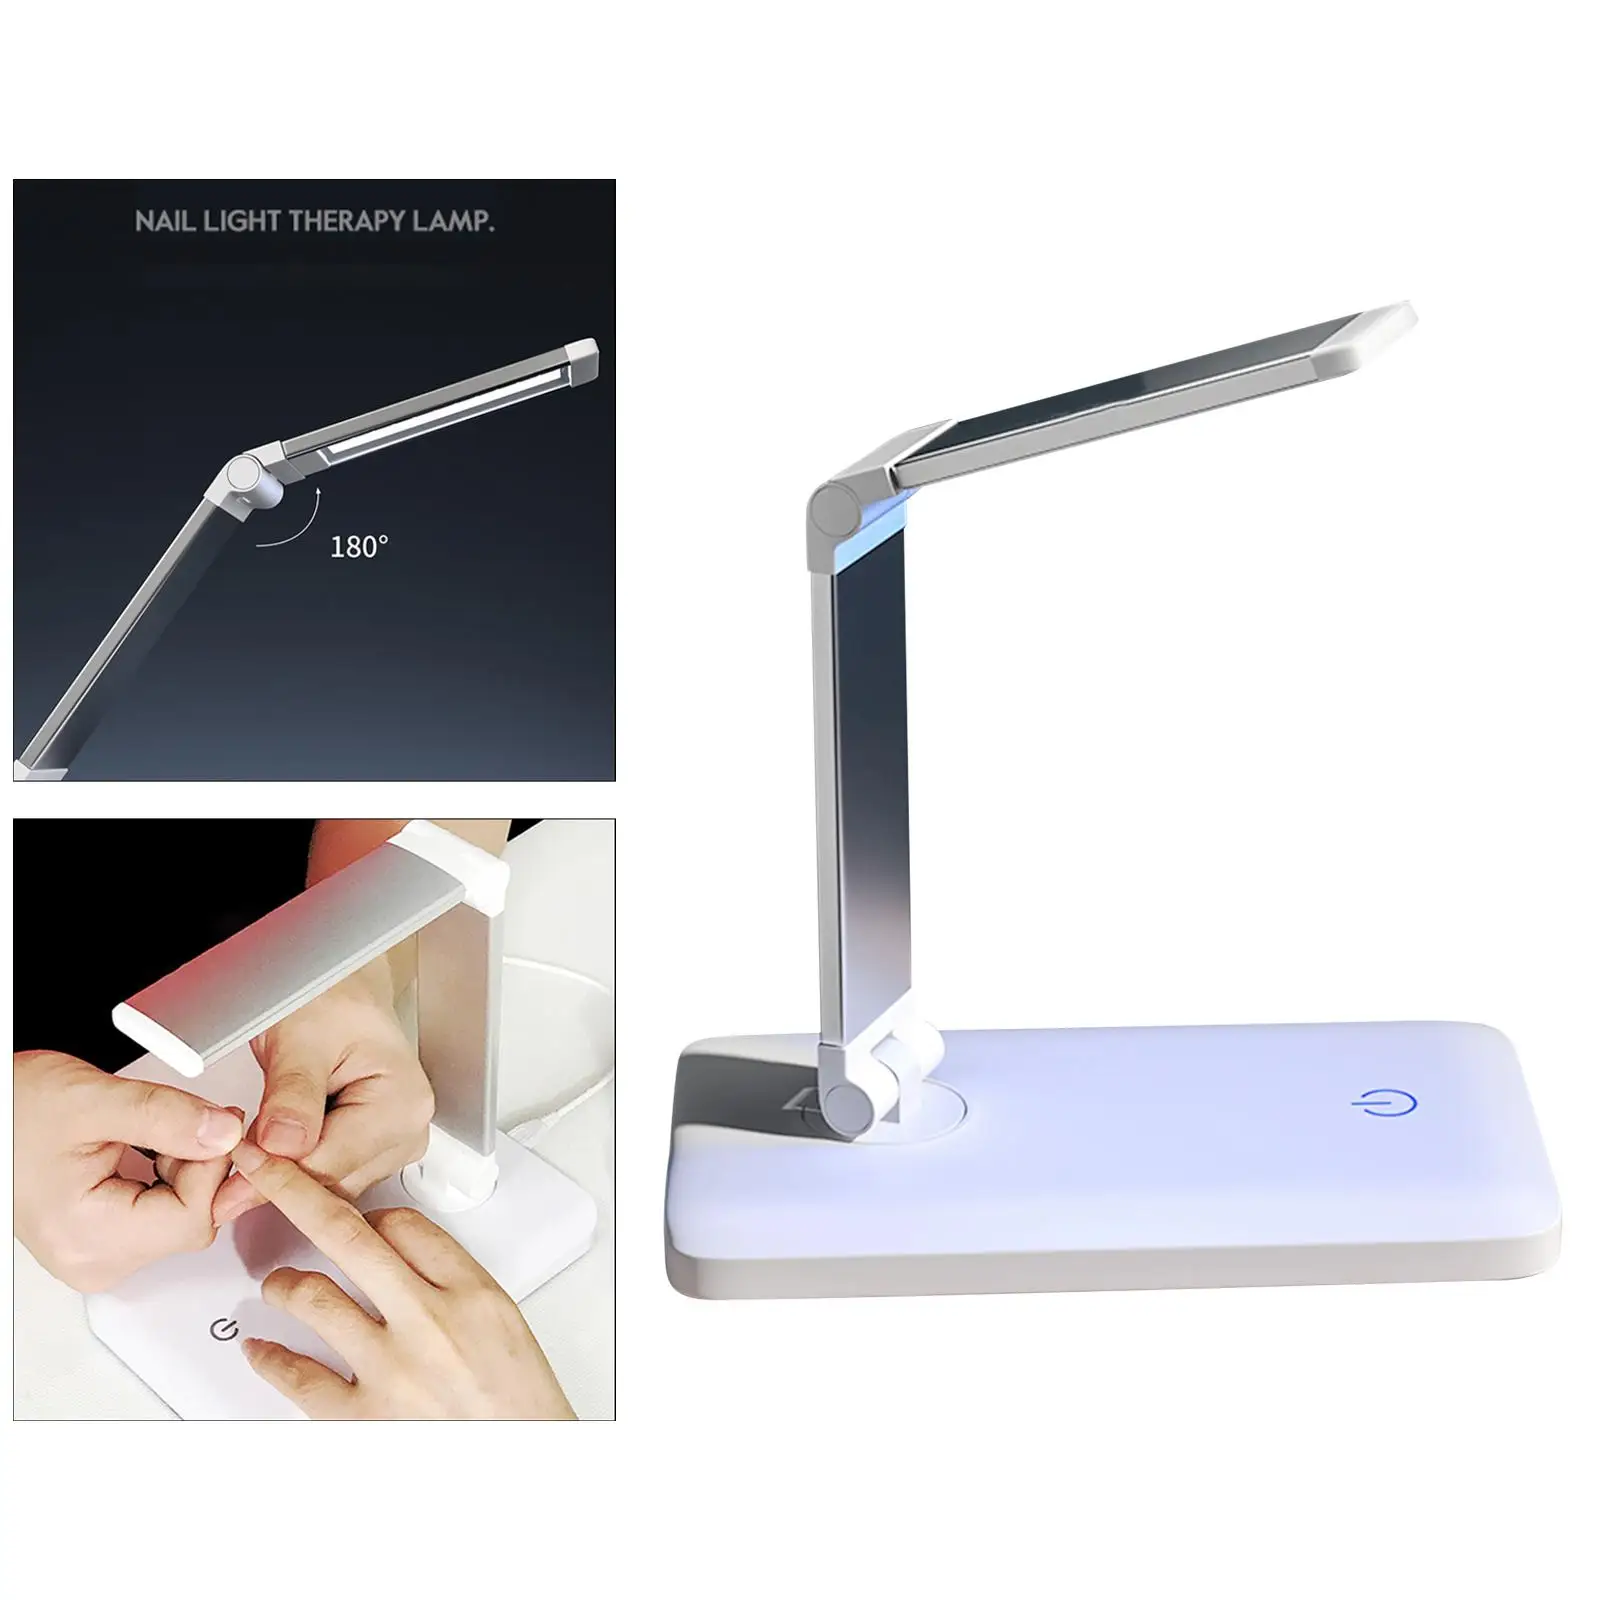 12W LED Nail Lamp Professional Accessories Supplies Tools for 